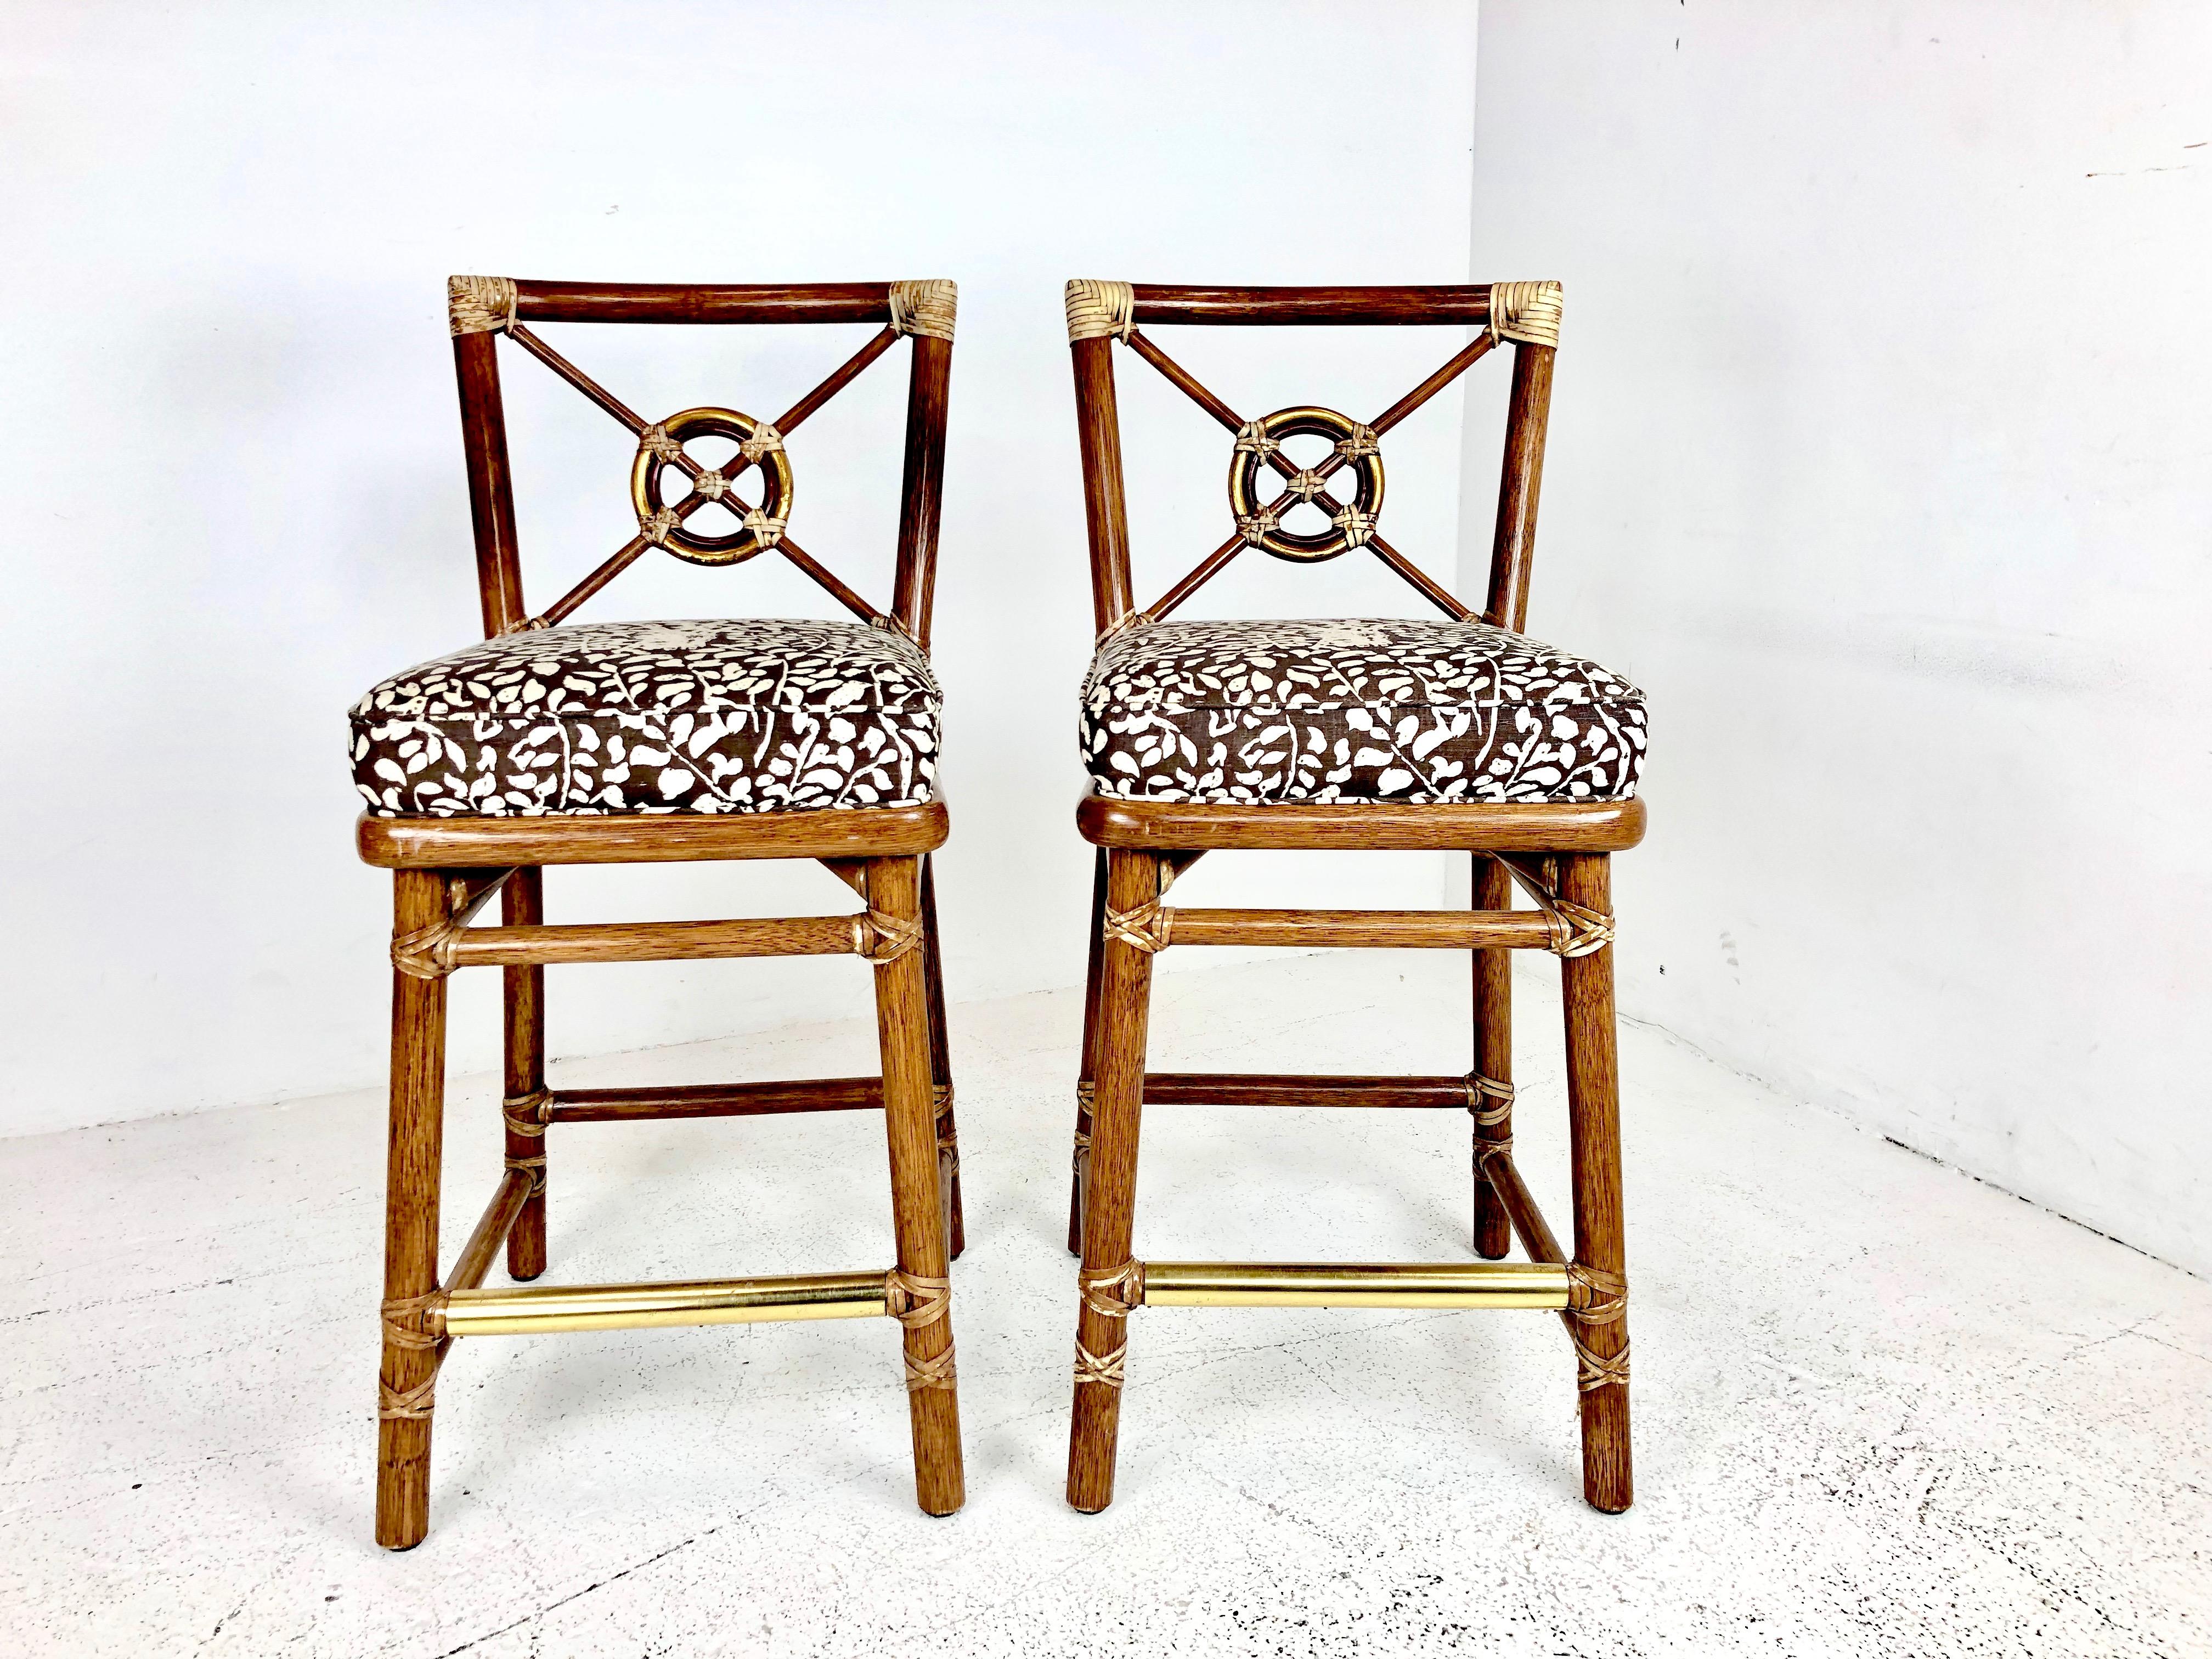 Pair of McGuire bar stools. Stools are in good vintage condition with signs of wear from use and age.

Dimensions:
18 W x 23.5 D x 38.5 T
Seat height 27
Seat width 16.